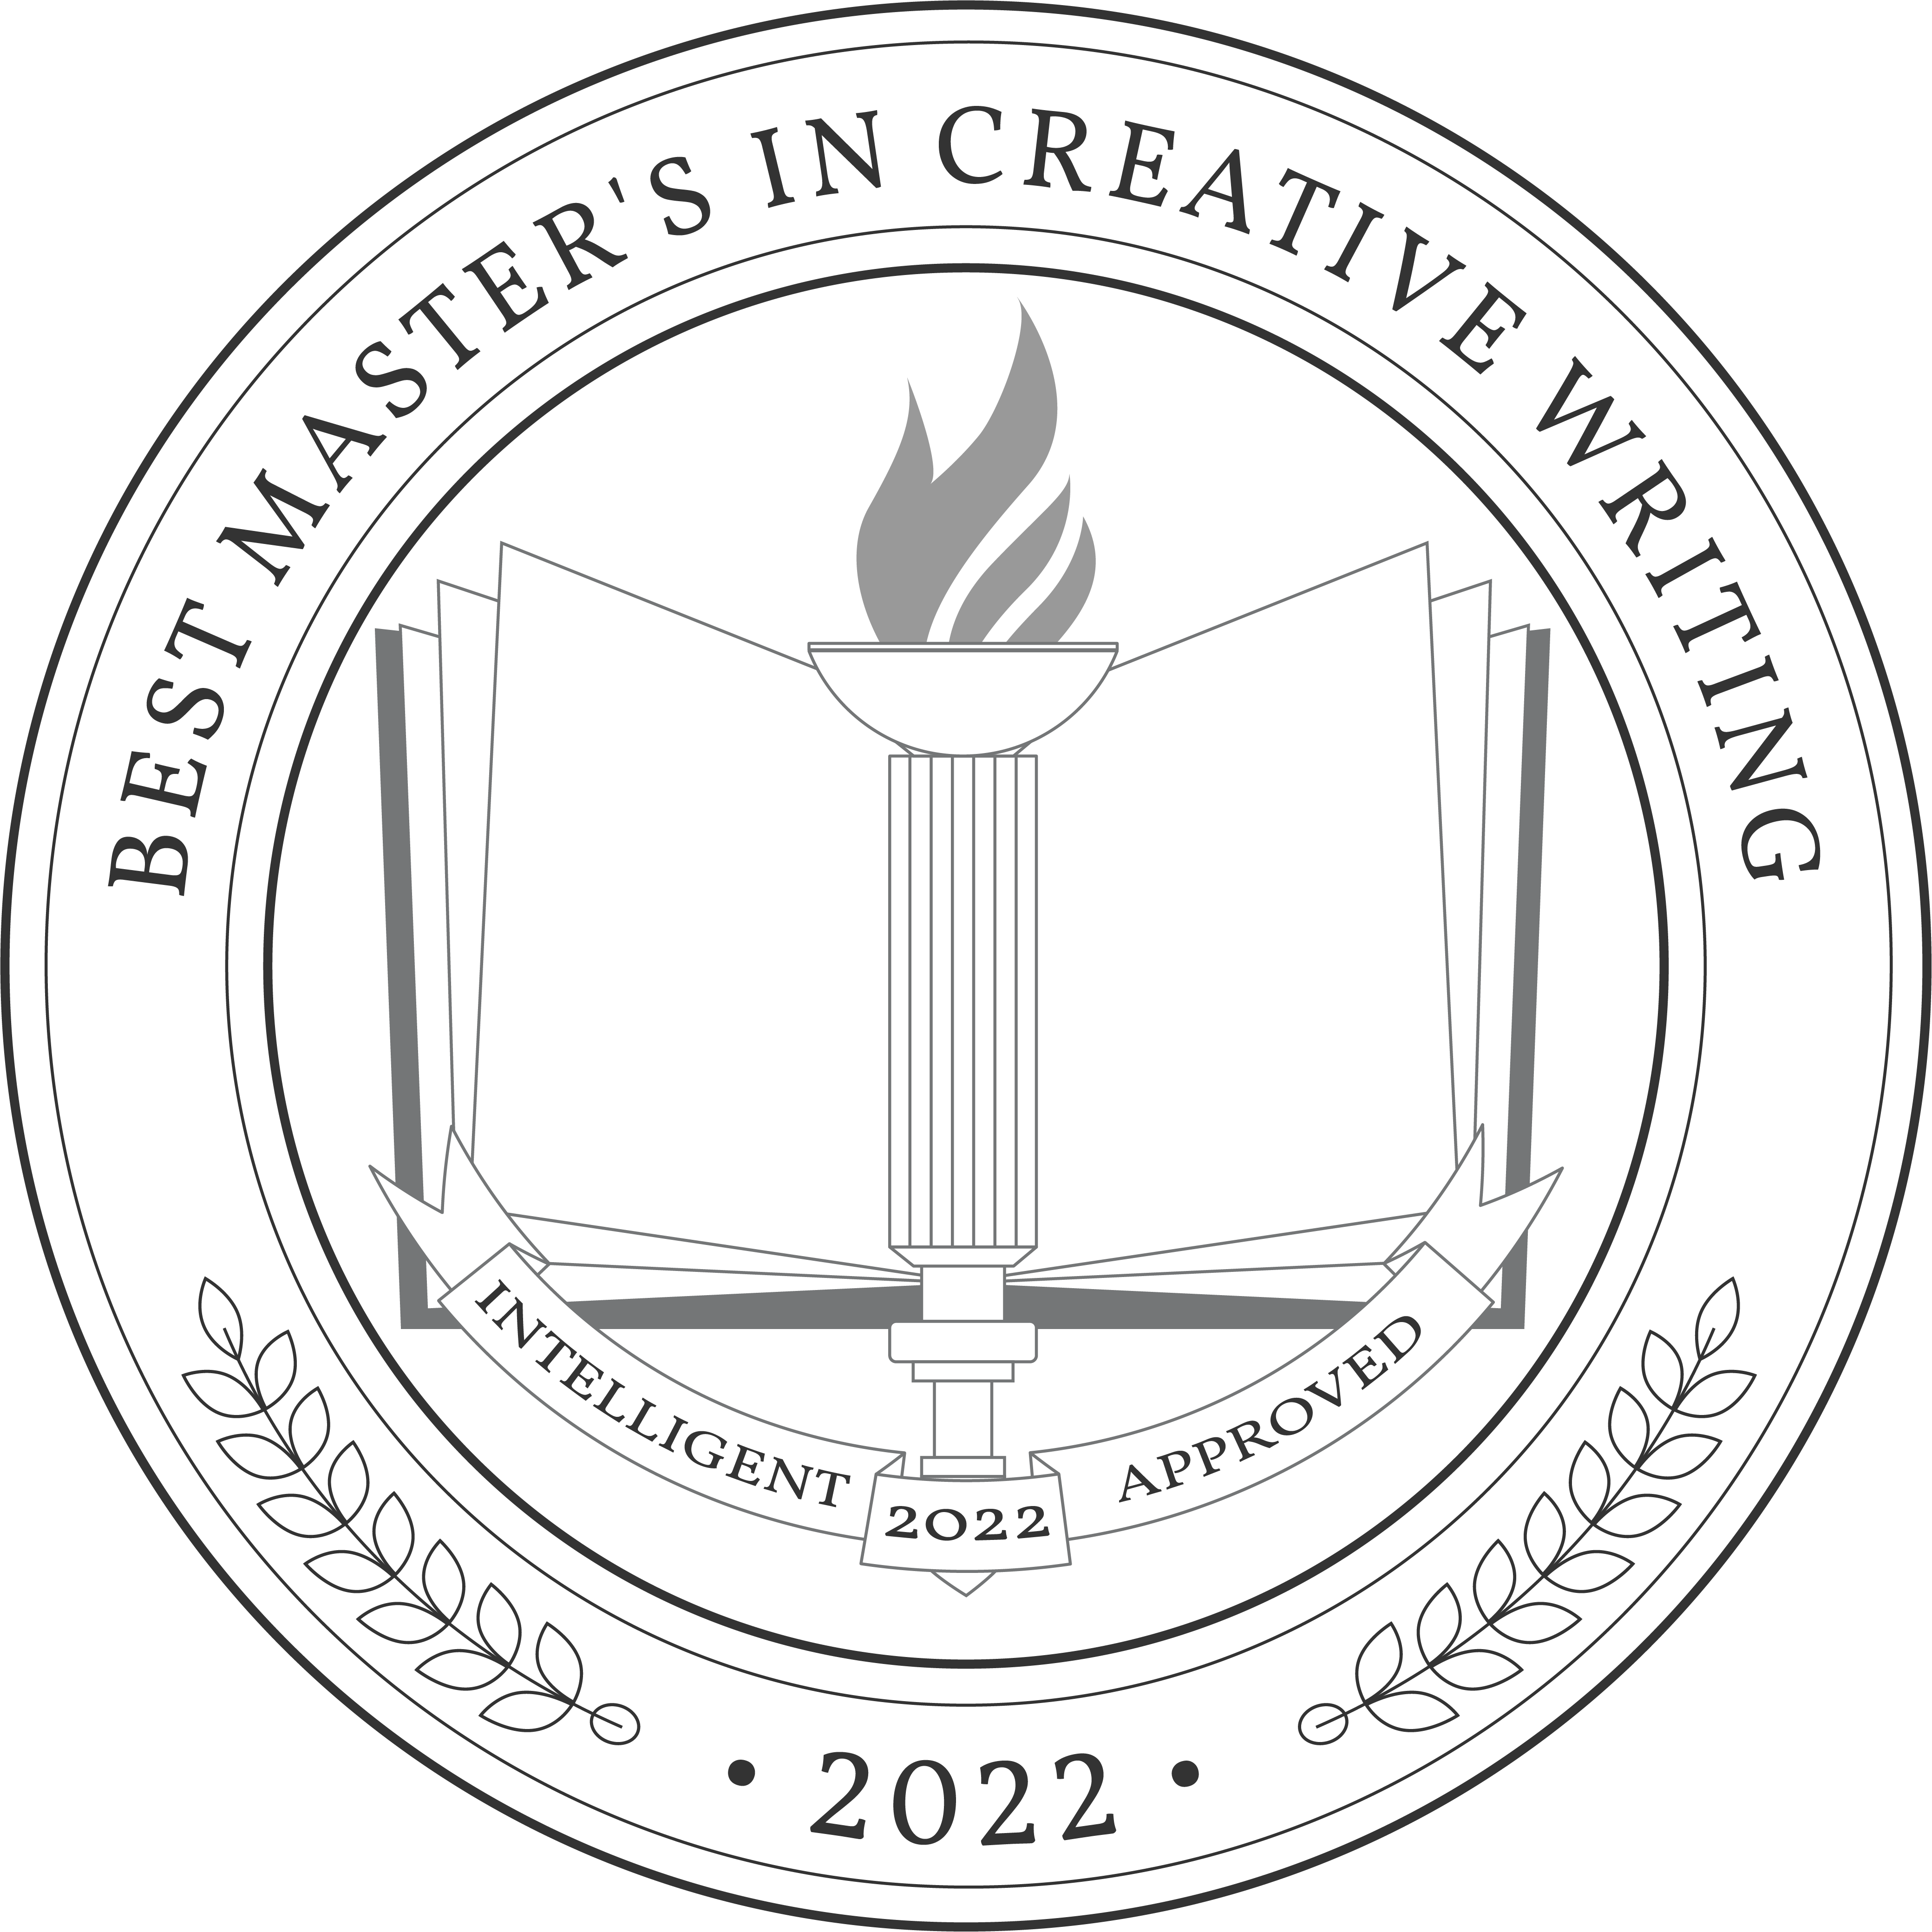 Best Master's in Creative Writing Degree Programs